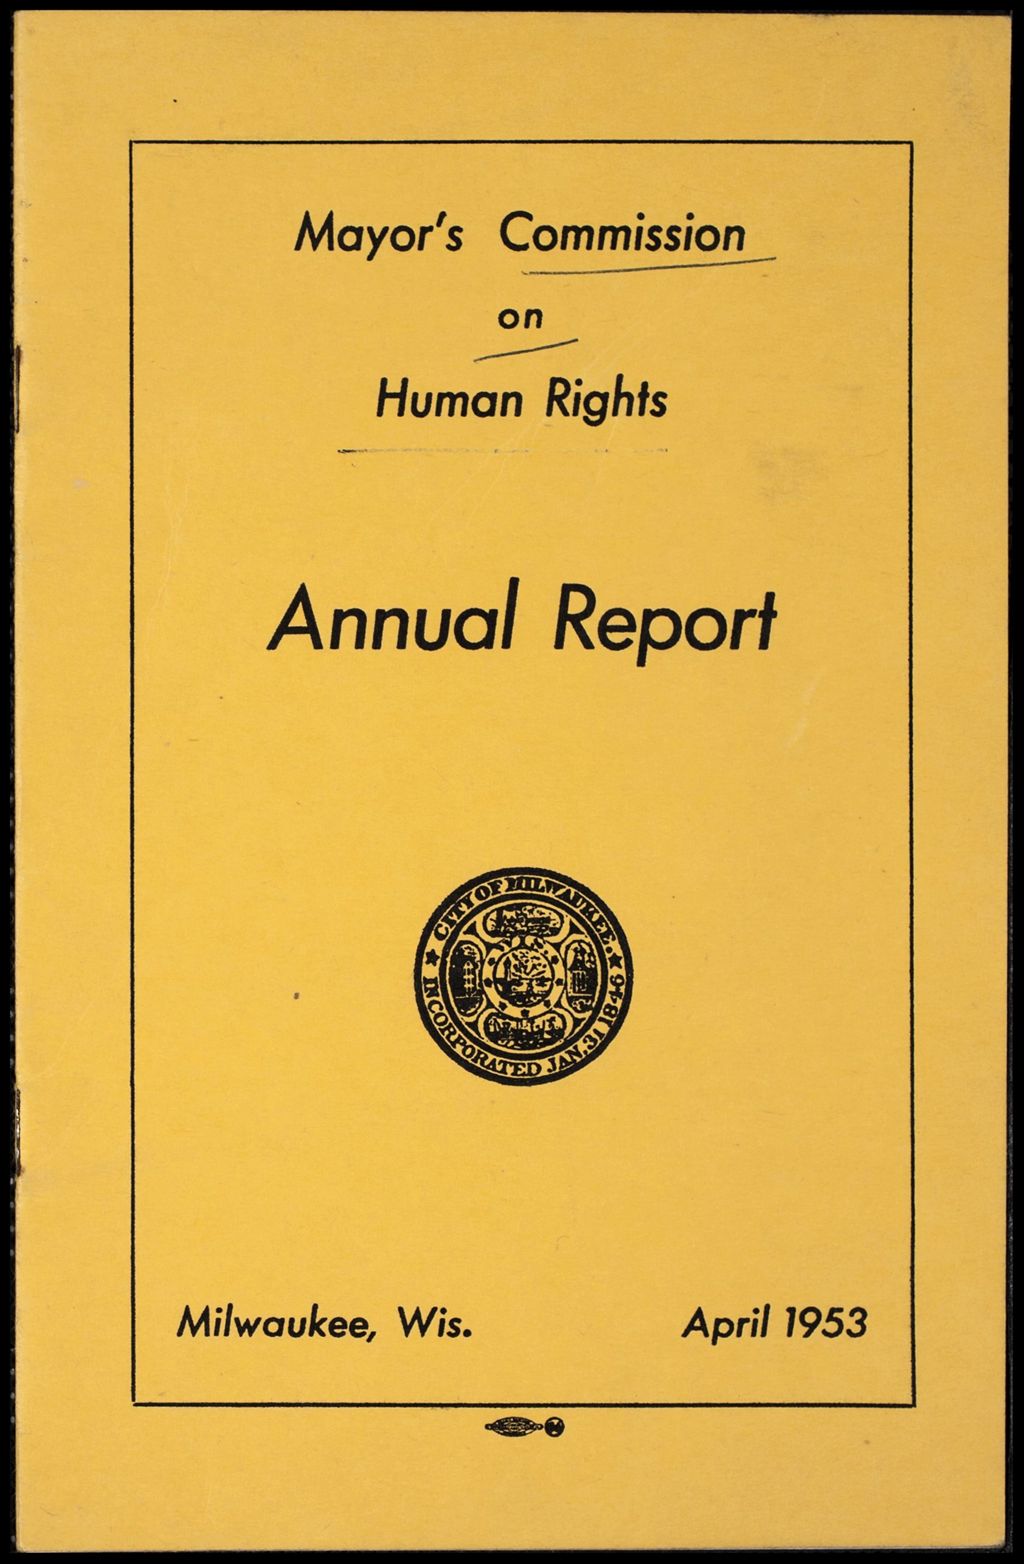 Miniature of Milwaukee Mayor's Commission on Human Rights annual reports, 1953-1955 (Folder I-2648)